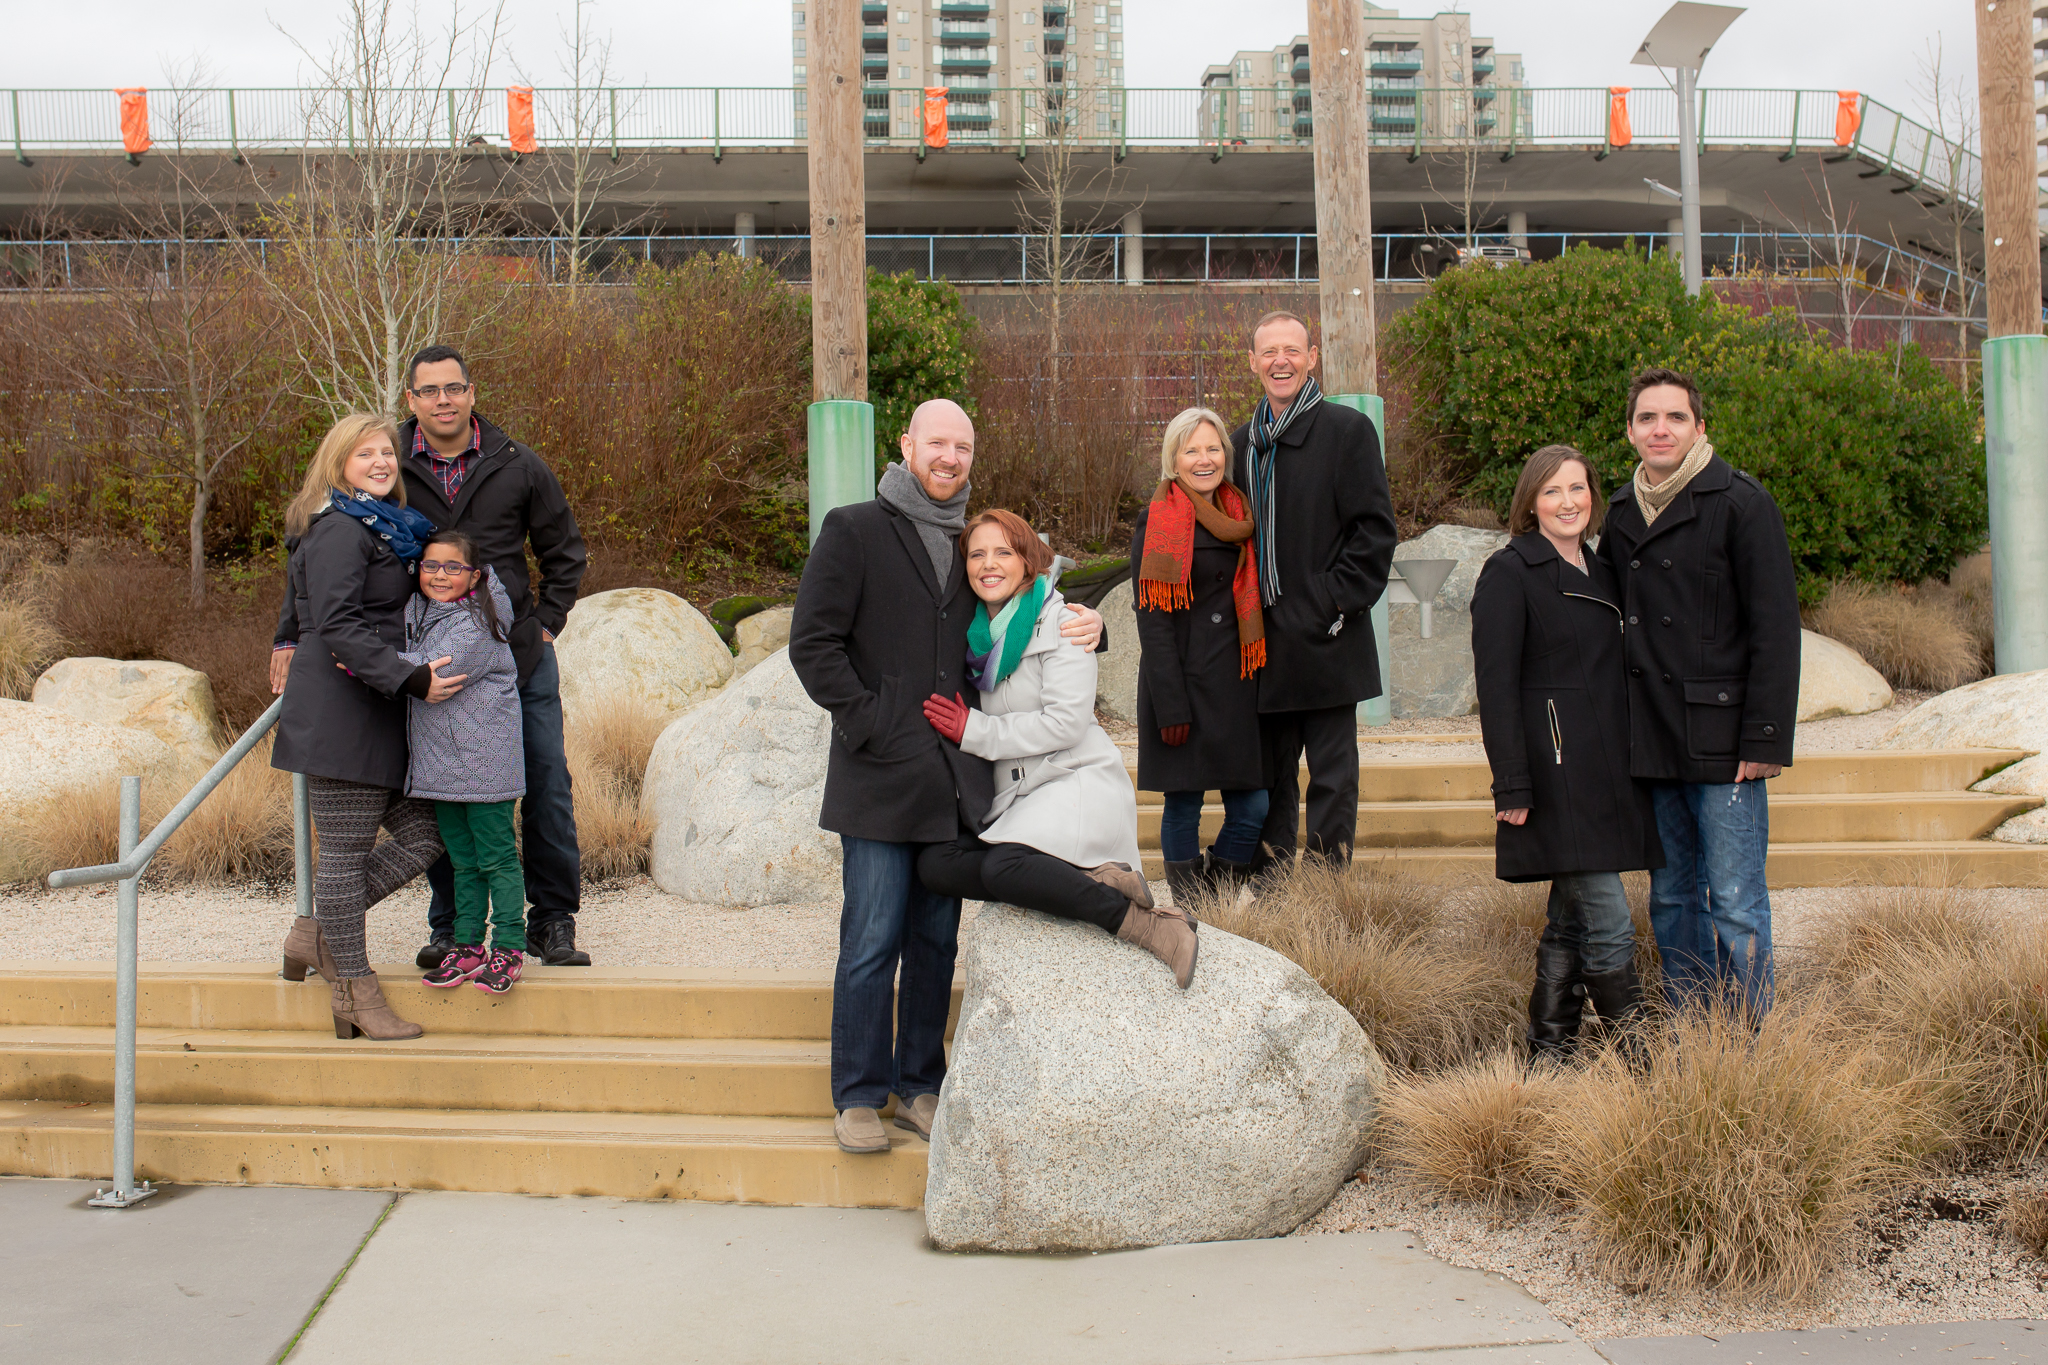 New Westminster Family Holiday Photographer